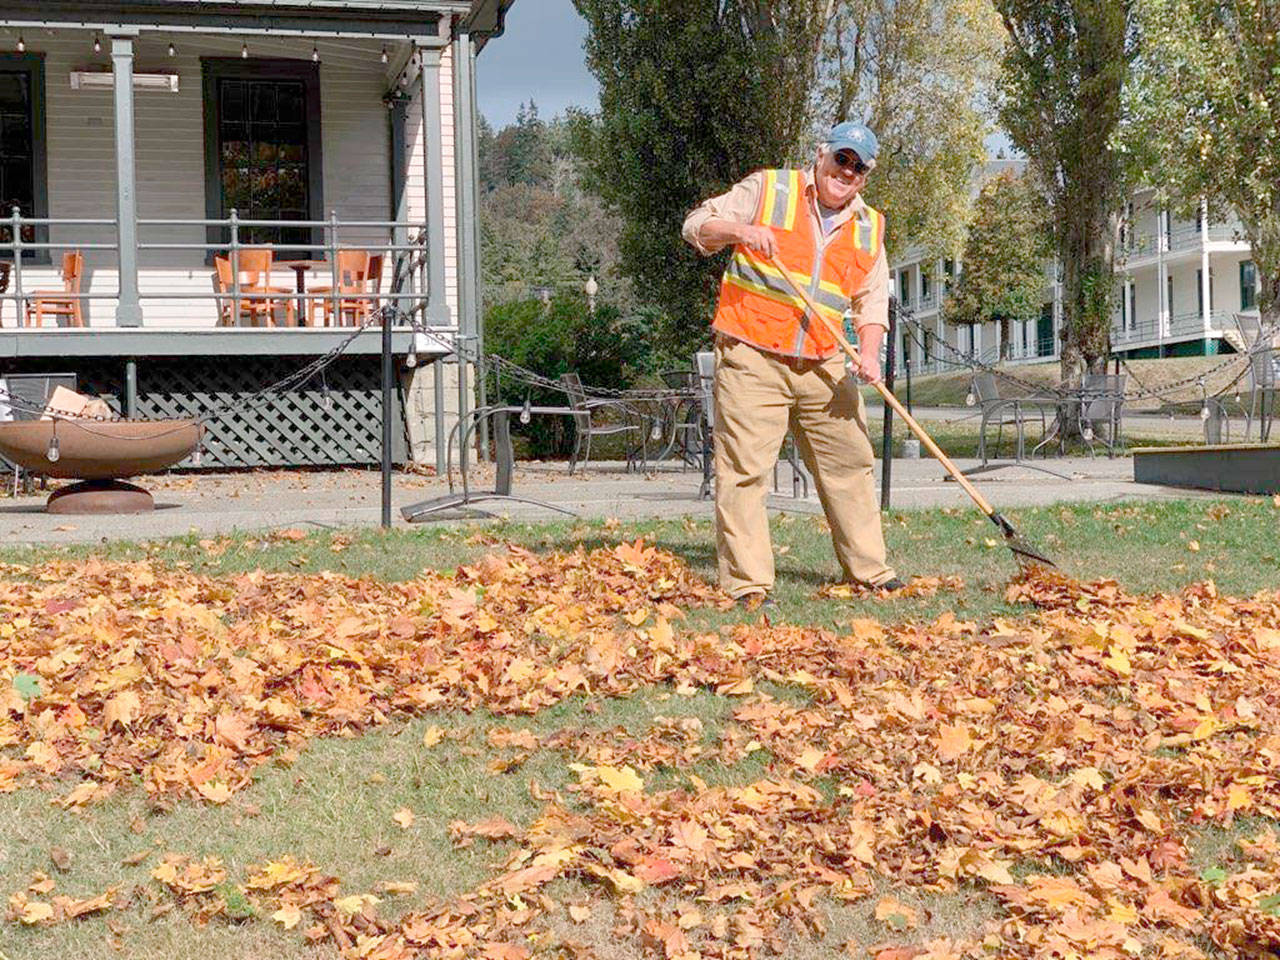 Todd Blankenship, Jefferson Community Conservation Corps’ first hired worker, rakes leaves at Fort Worden State Park. His position was funded by donations raised by the JCCC and he works for the Fort Worden Public Development Authority. (Photo courtesy of Jefferson Community Conservation Corps)